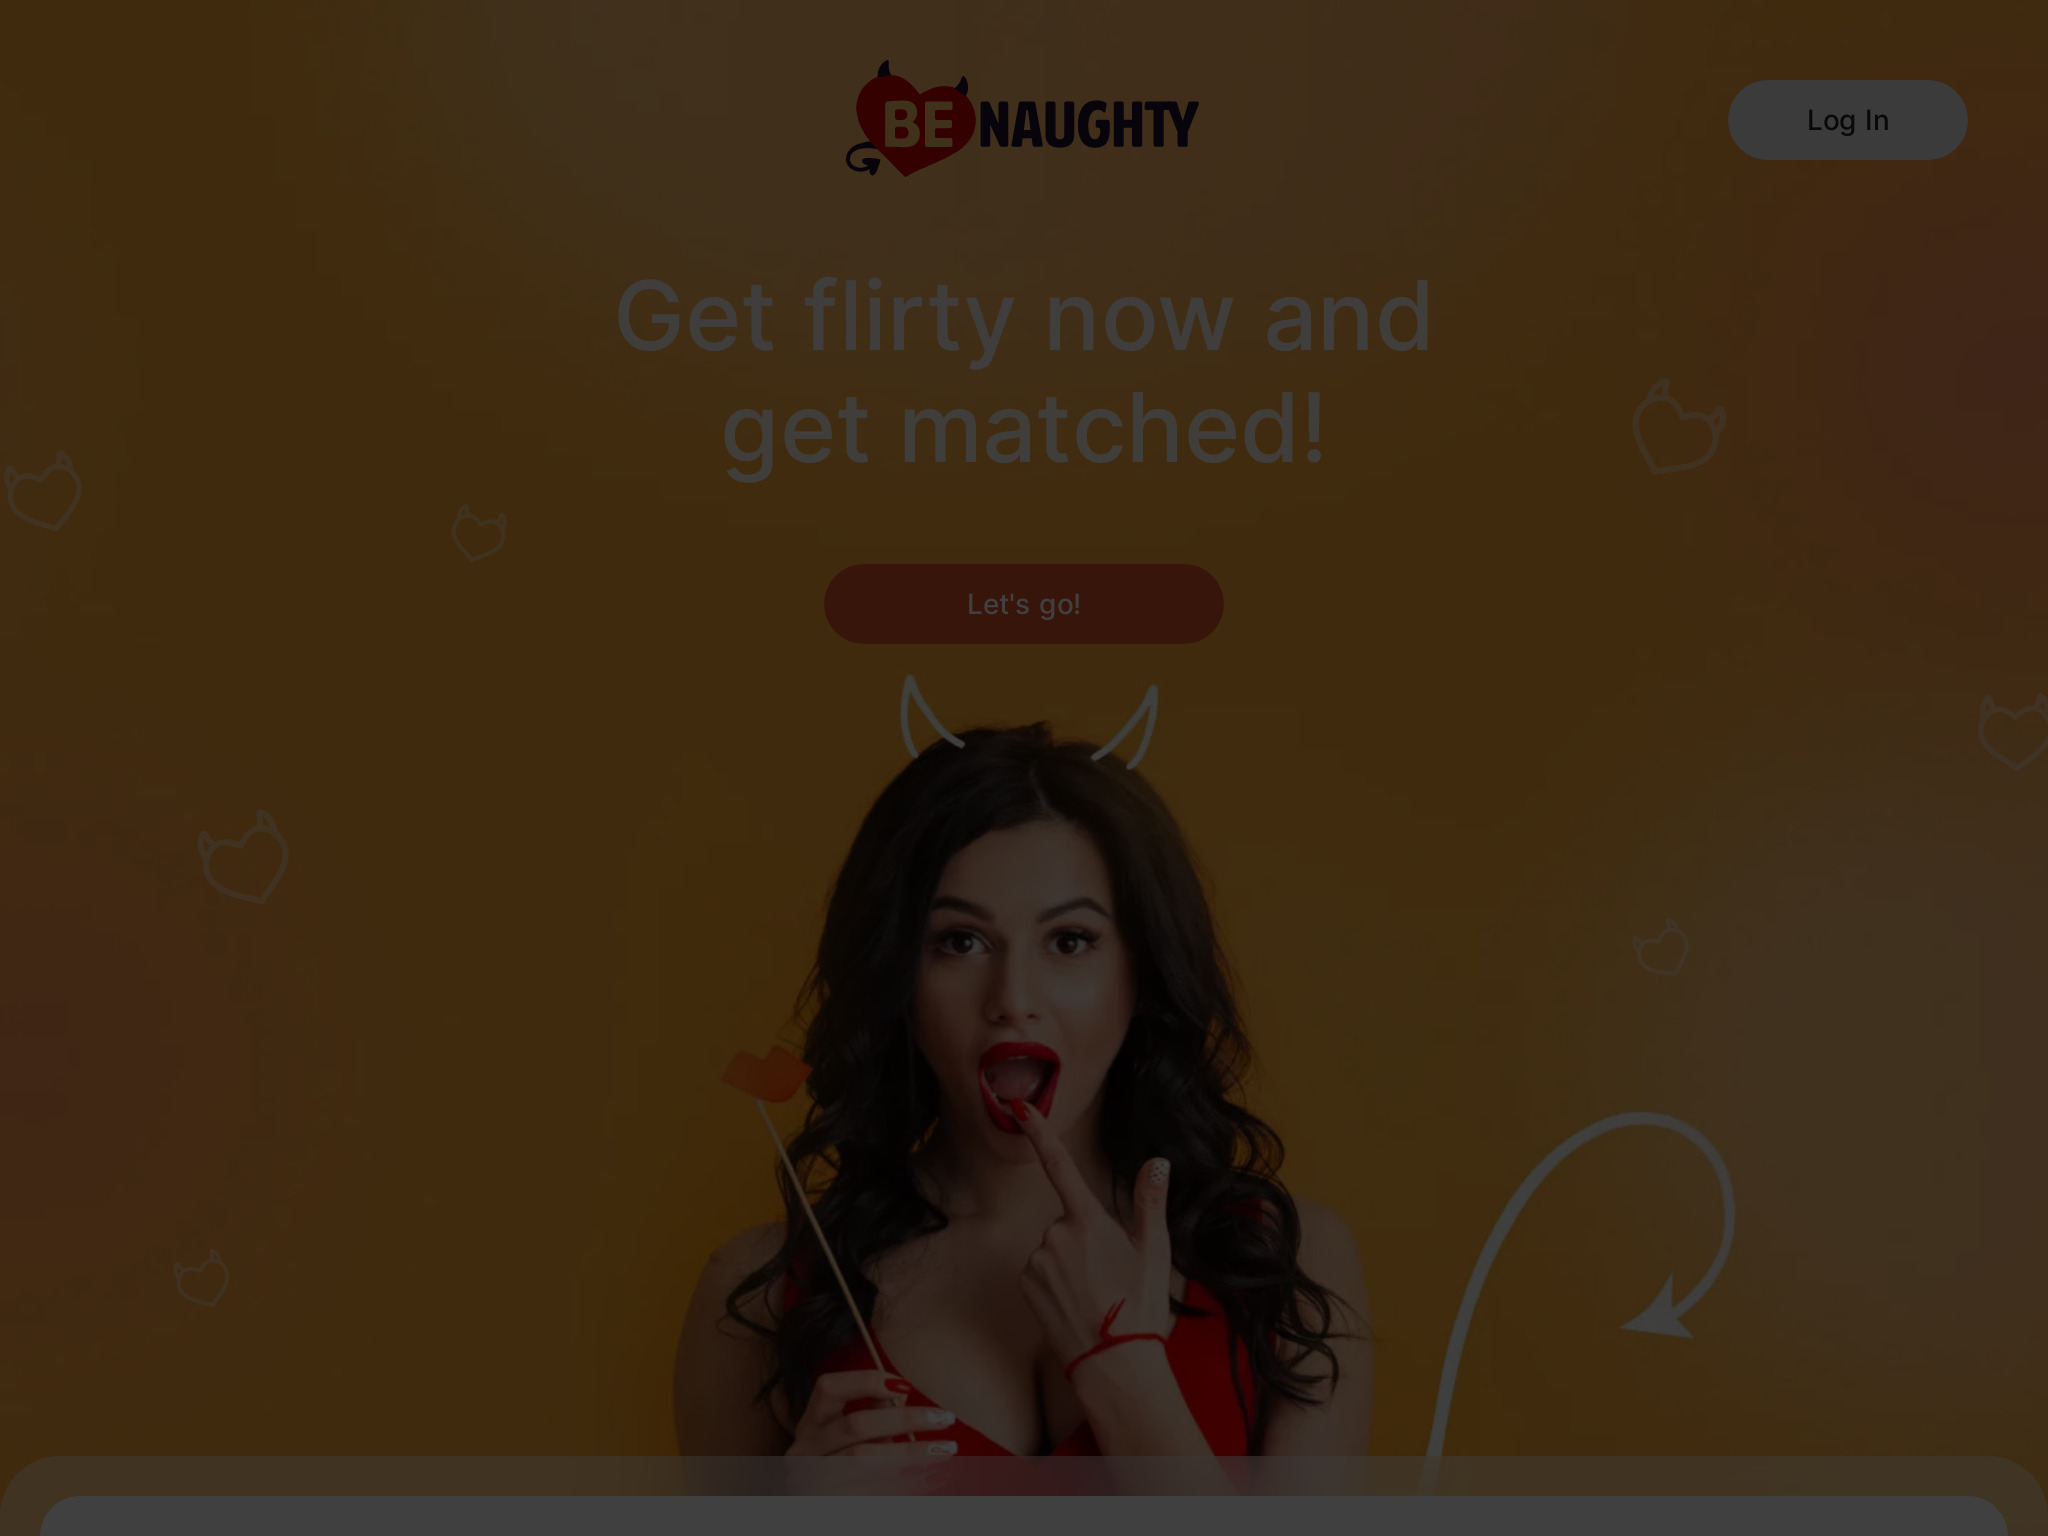 BeNaughty Review: An In-Depth Look at the Popular Dating Platform